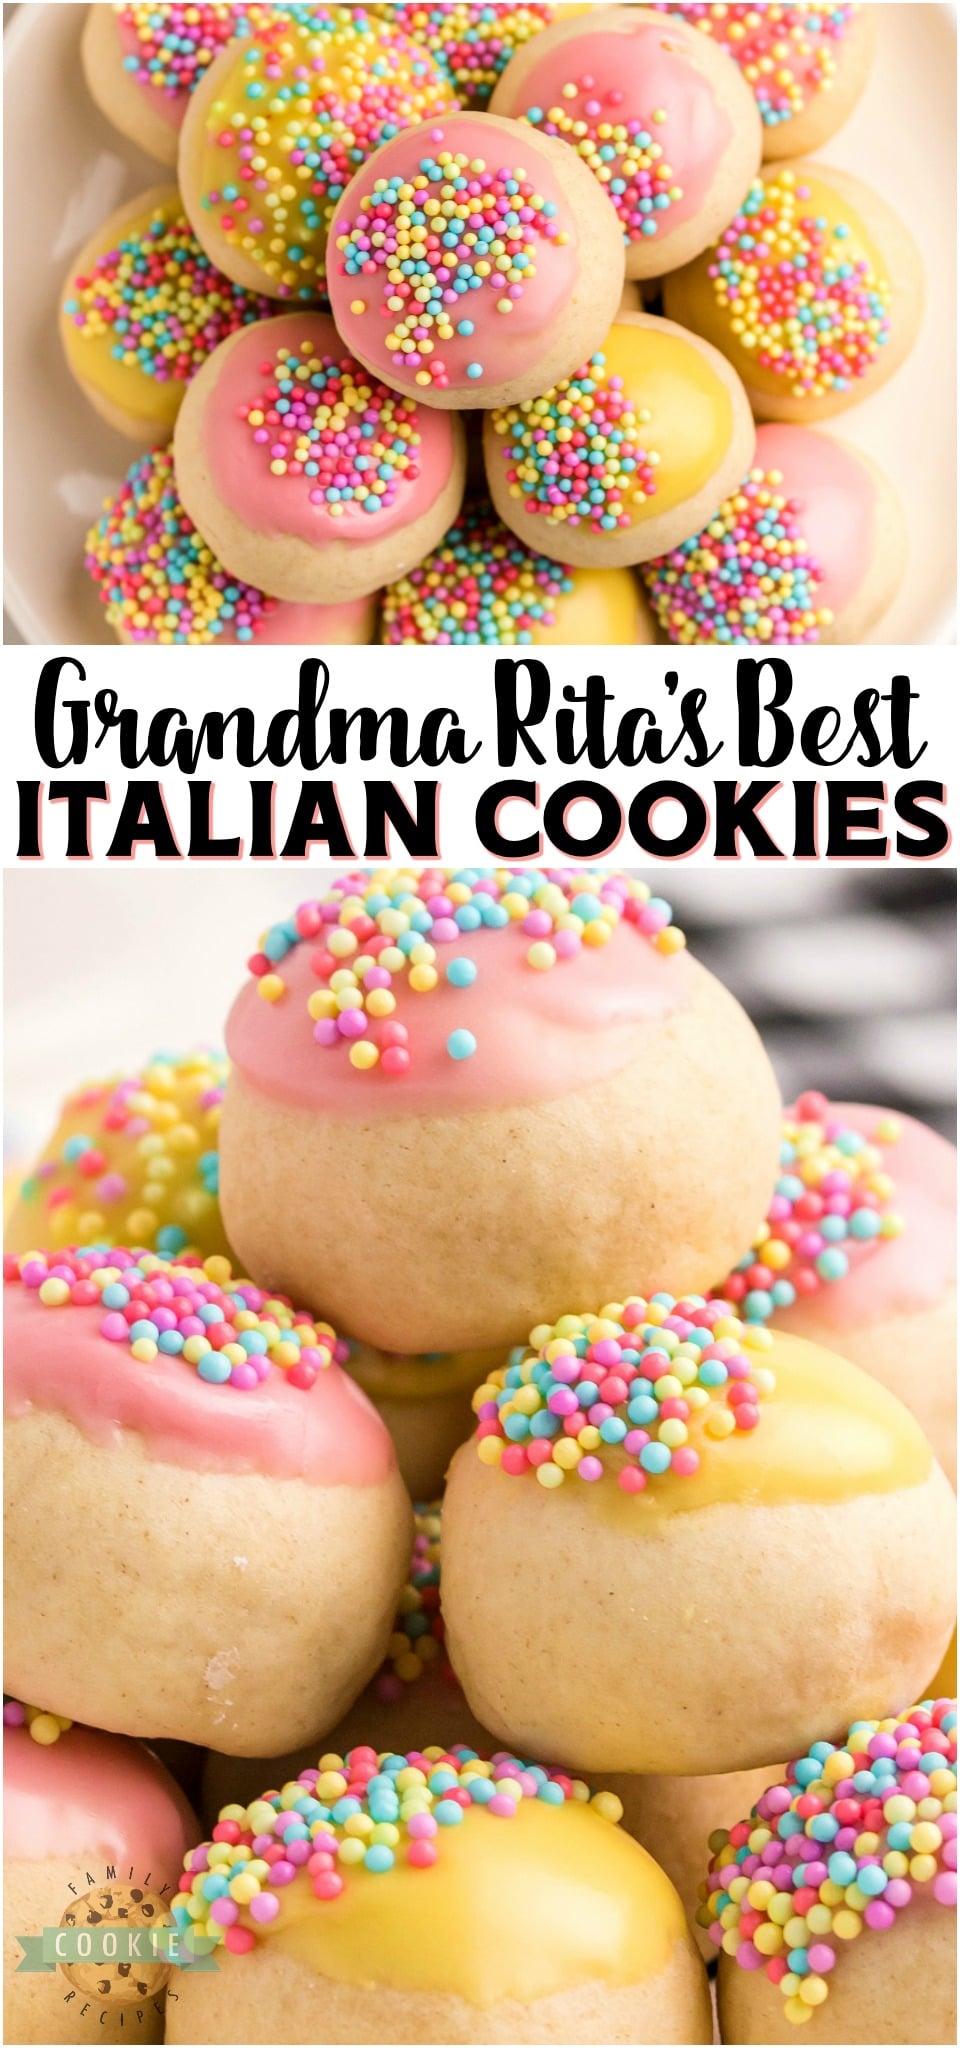 Lovely Italian Cookie recipe I got from my Grandmother! Tender dough rolled into balls, baked & topped with a sweet glaze and colorful sprinkles perfect for any occasion!